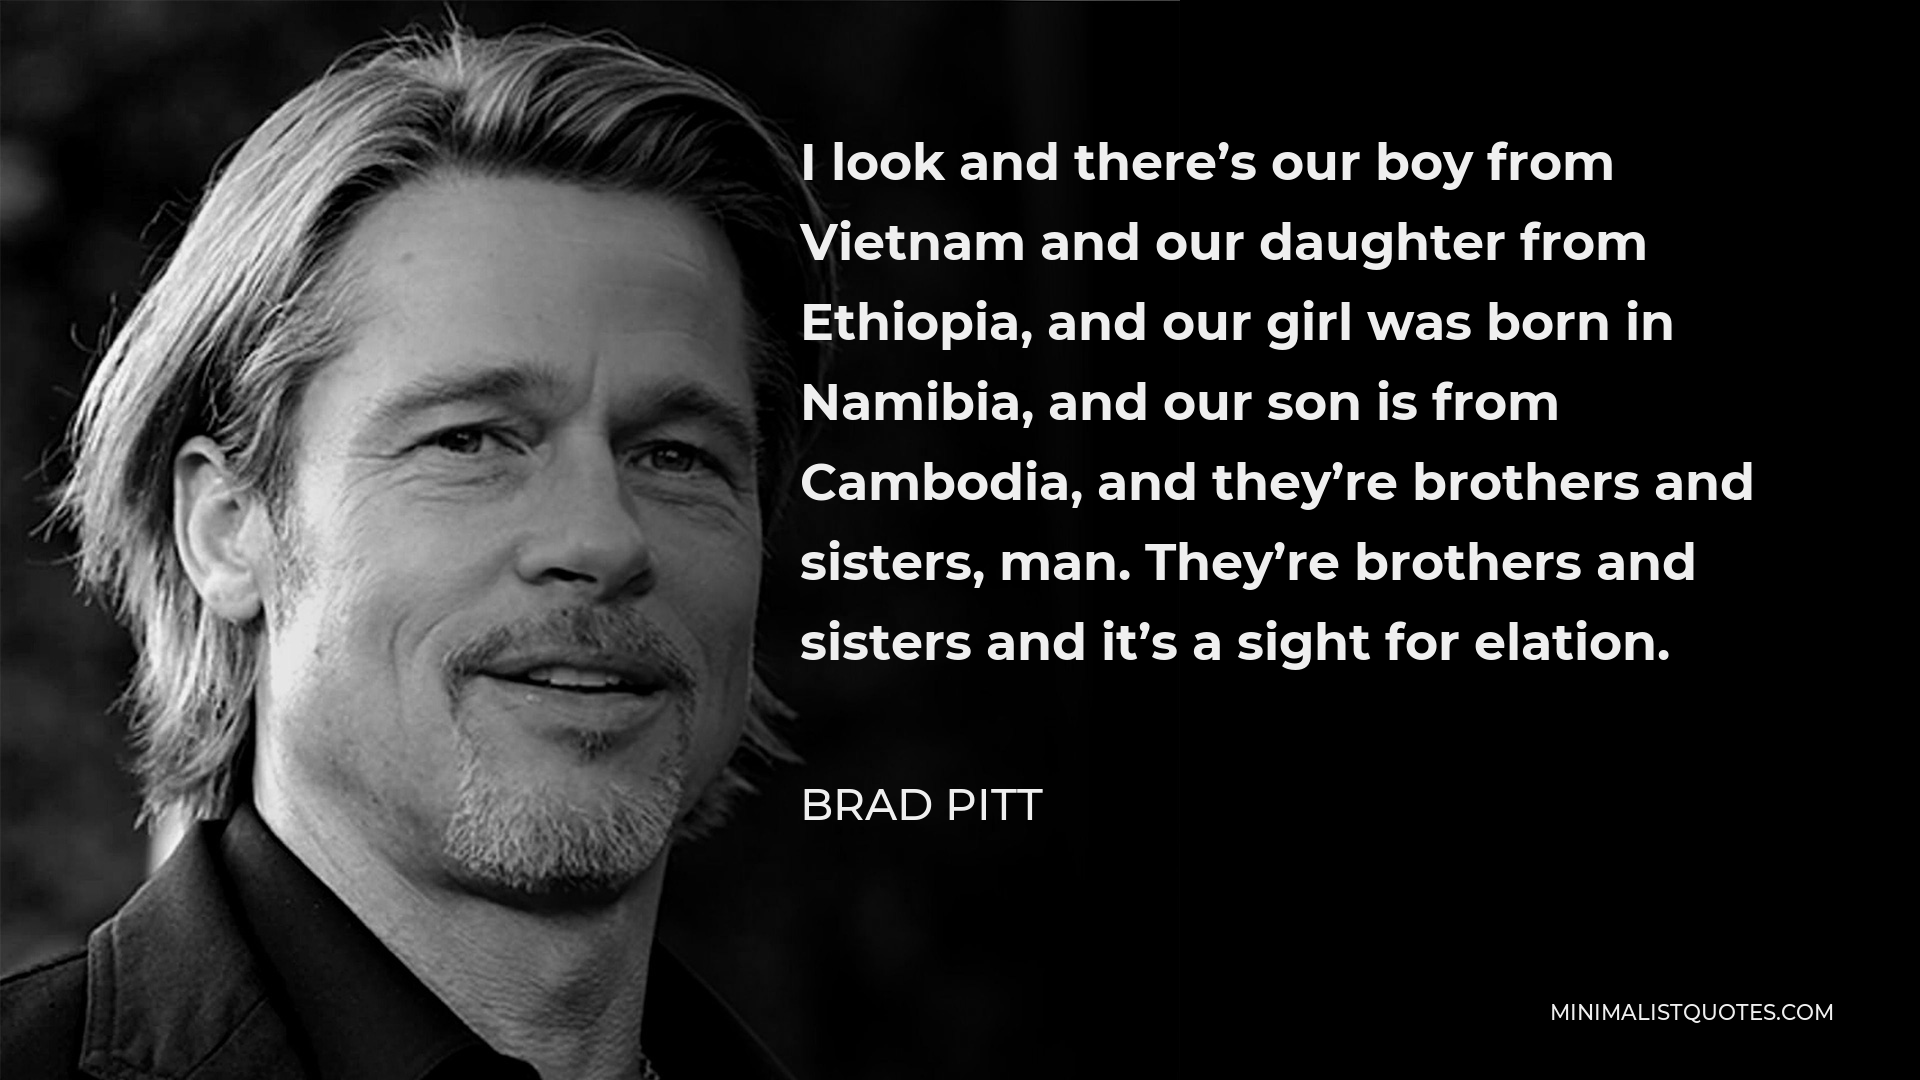 Brad Pitt Quote - I look and there’s our boy from Vietnam and our daughter from Ethiopia, and our girl was born in Namibia, and our son is from Cambodia, and they’re brothers and sisters, man. They’re brothers and sisters and it’s a sight for elation.